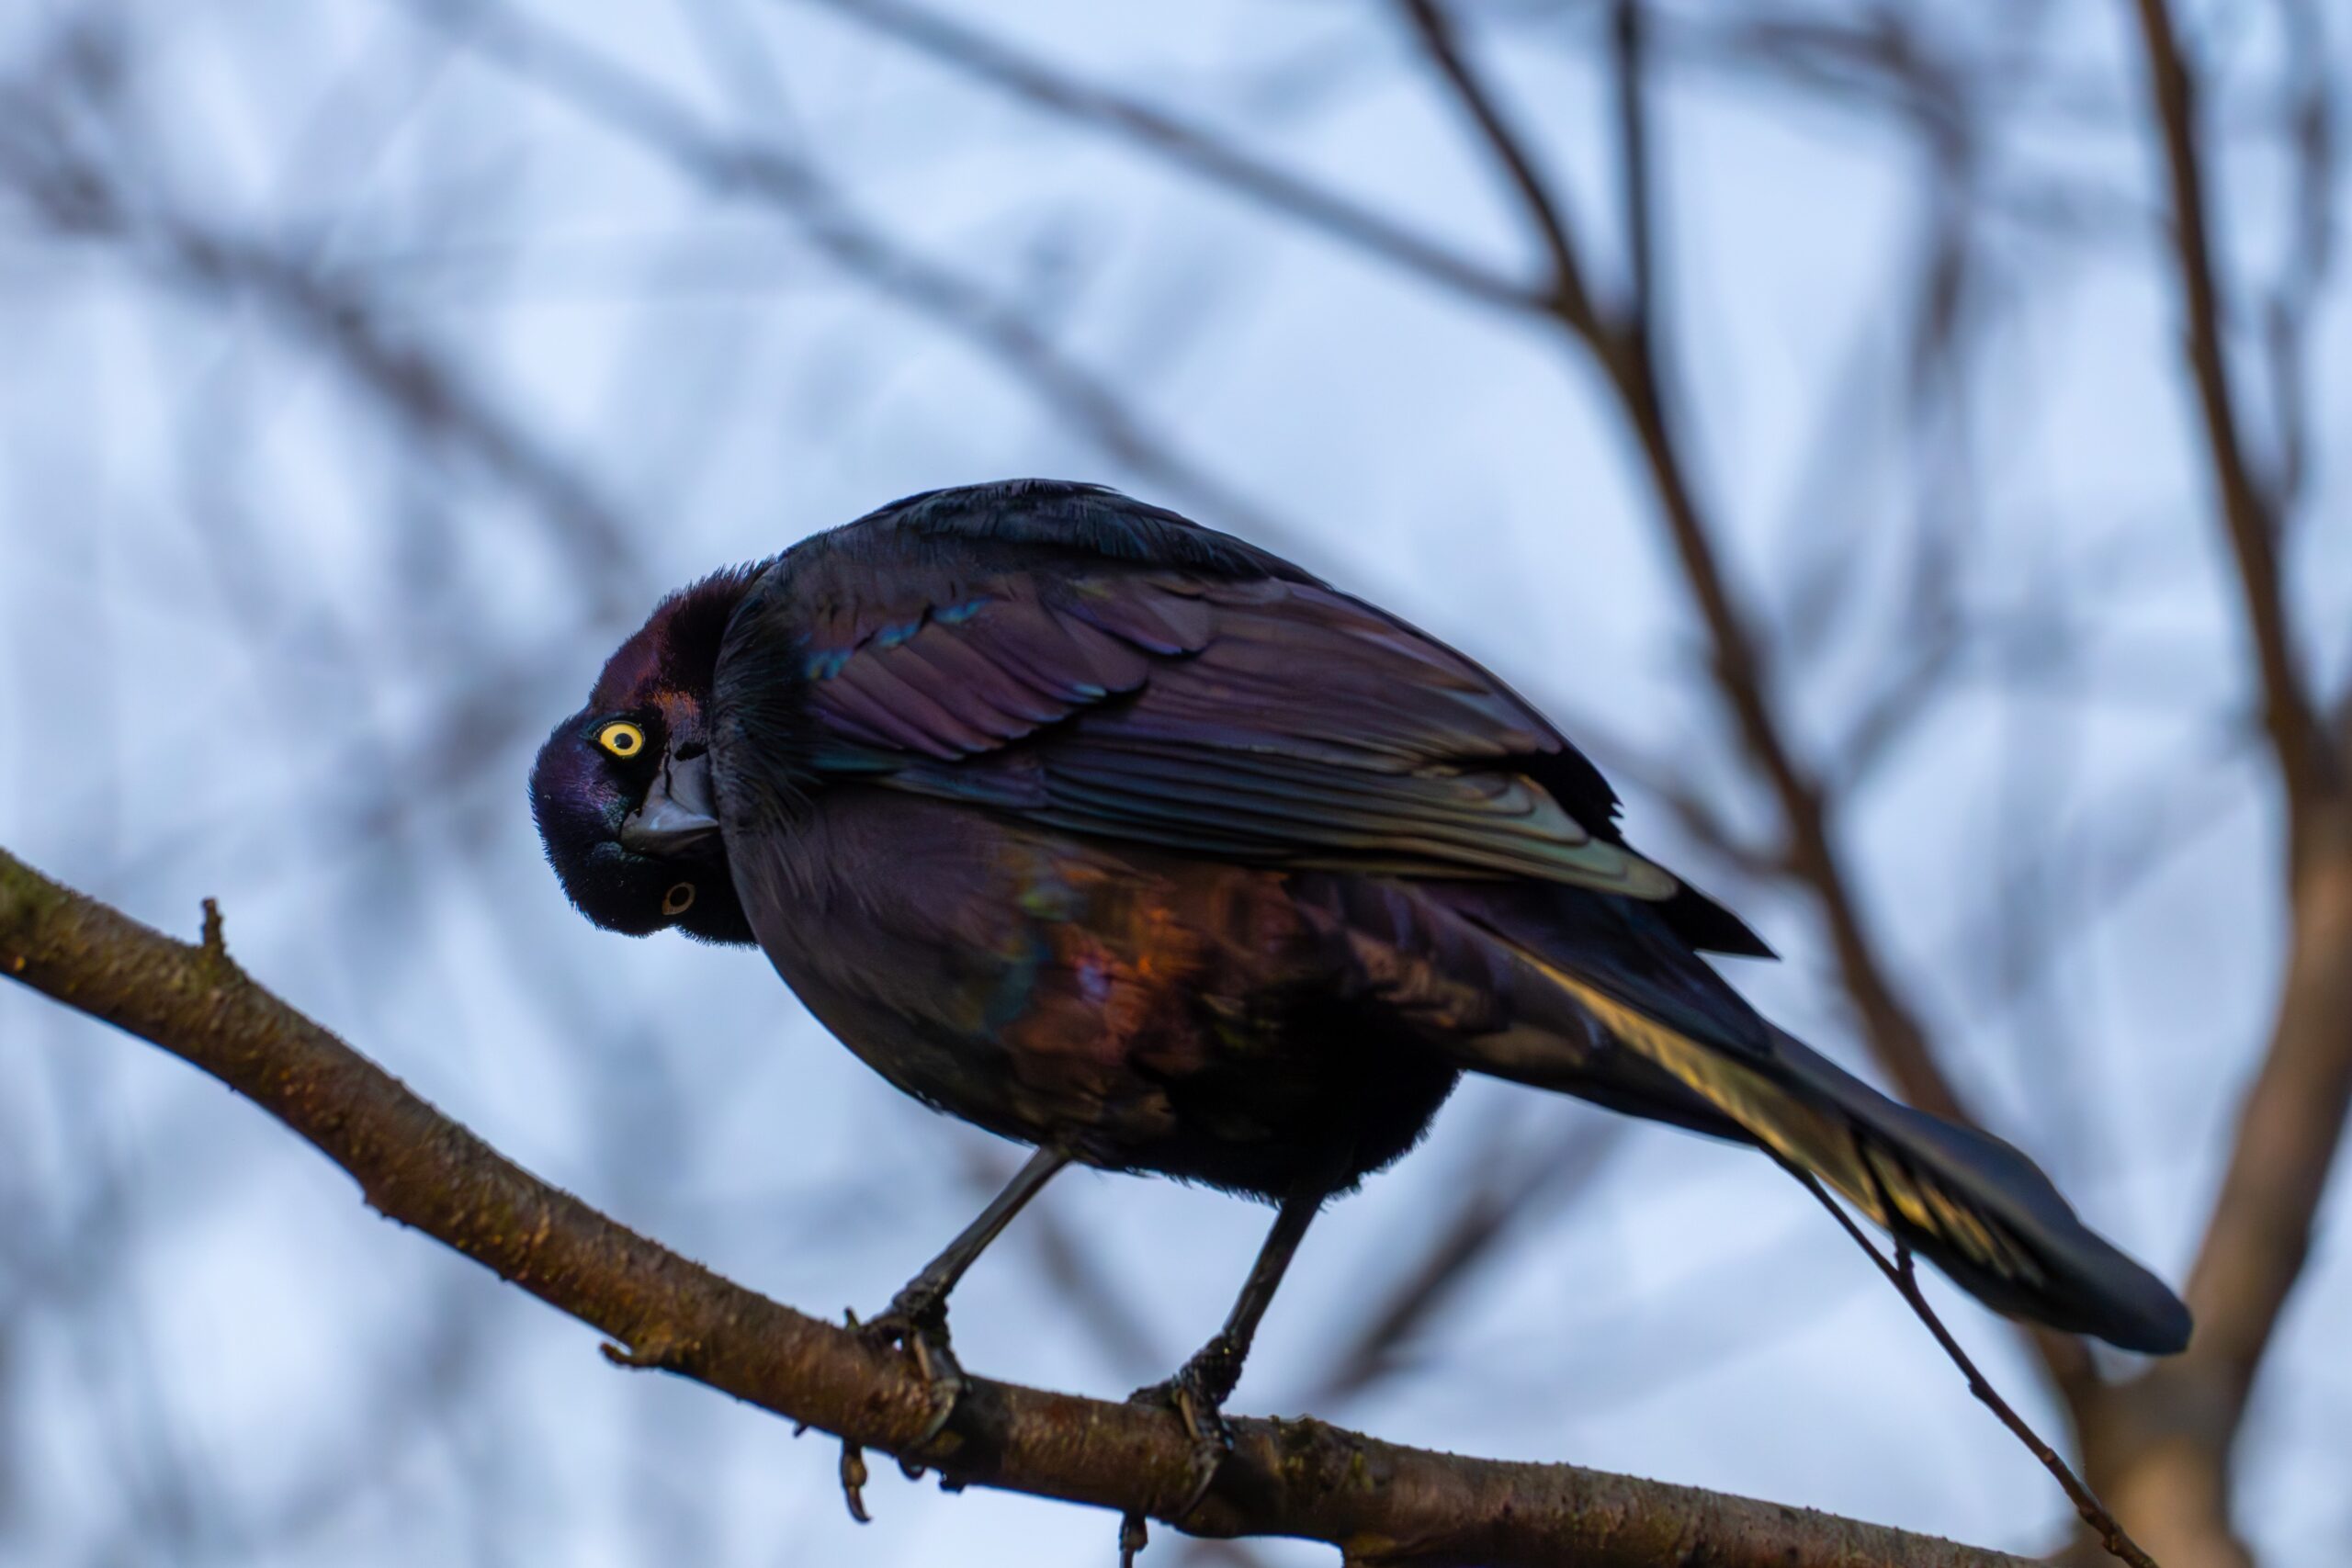 A Common Grackle, a type of bird